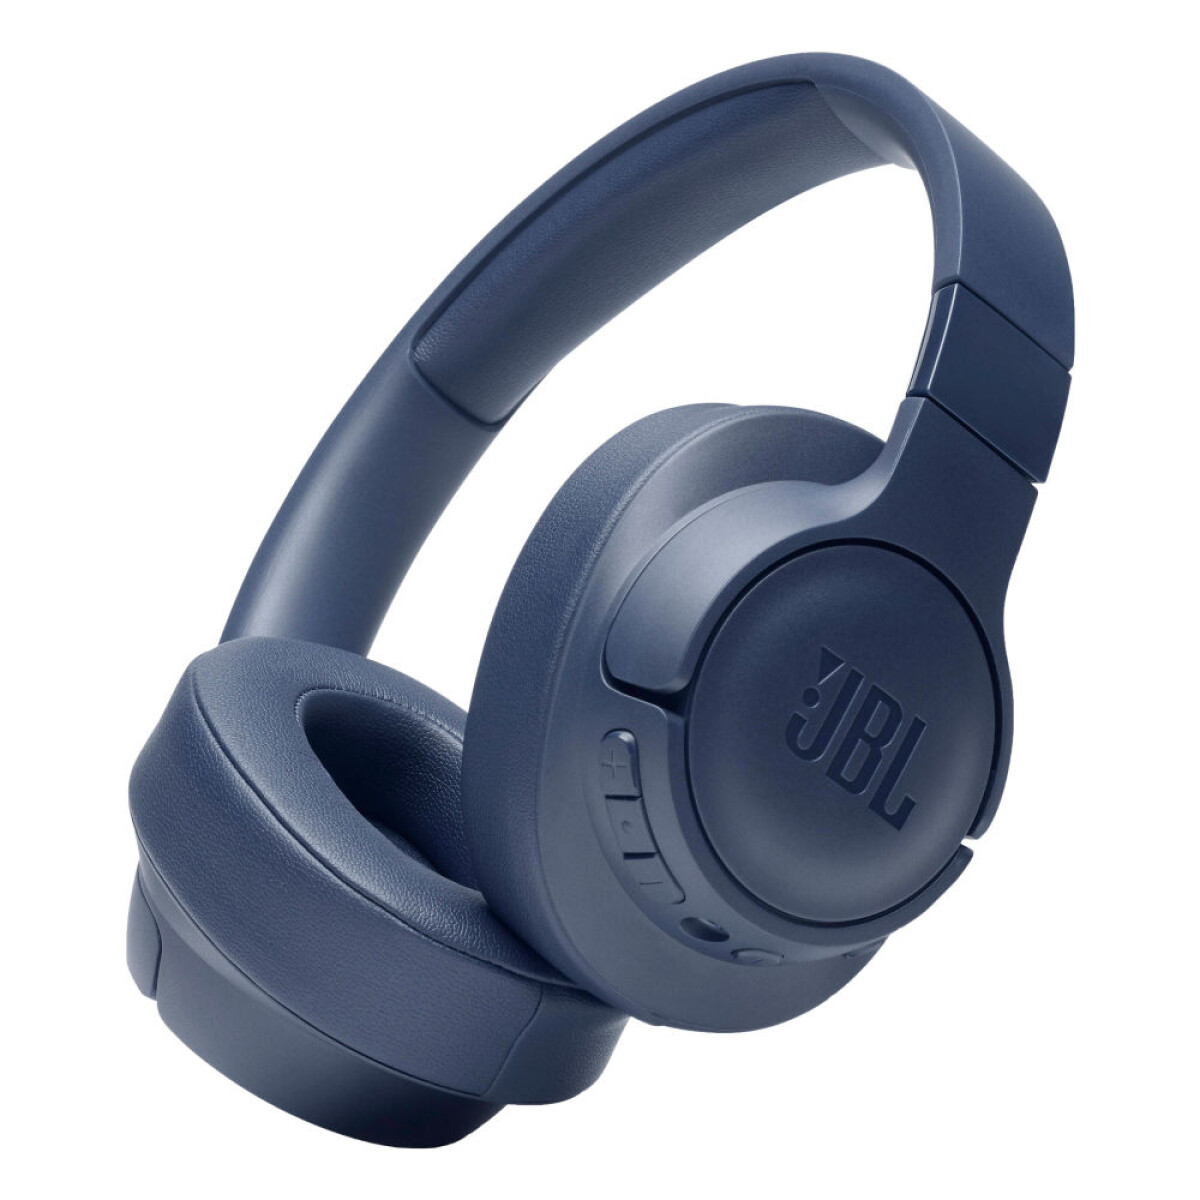 Auricular inalambrico bluetooth jbl t760 noise cancelling - Azul 